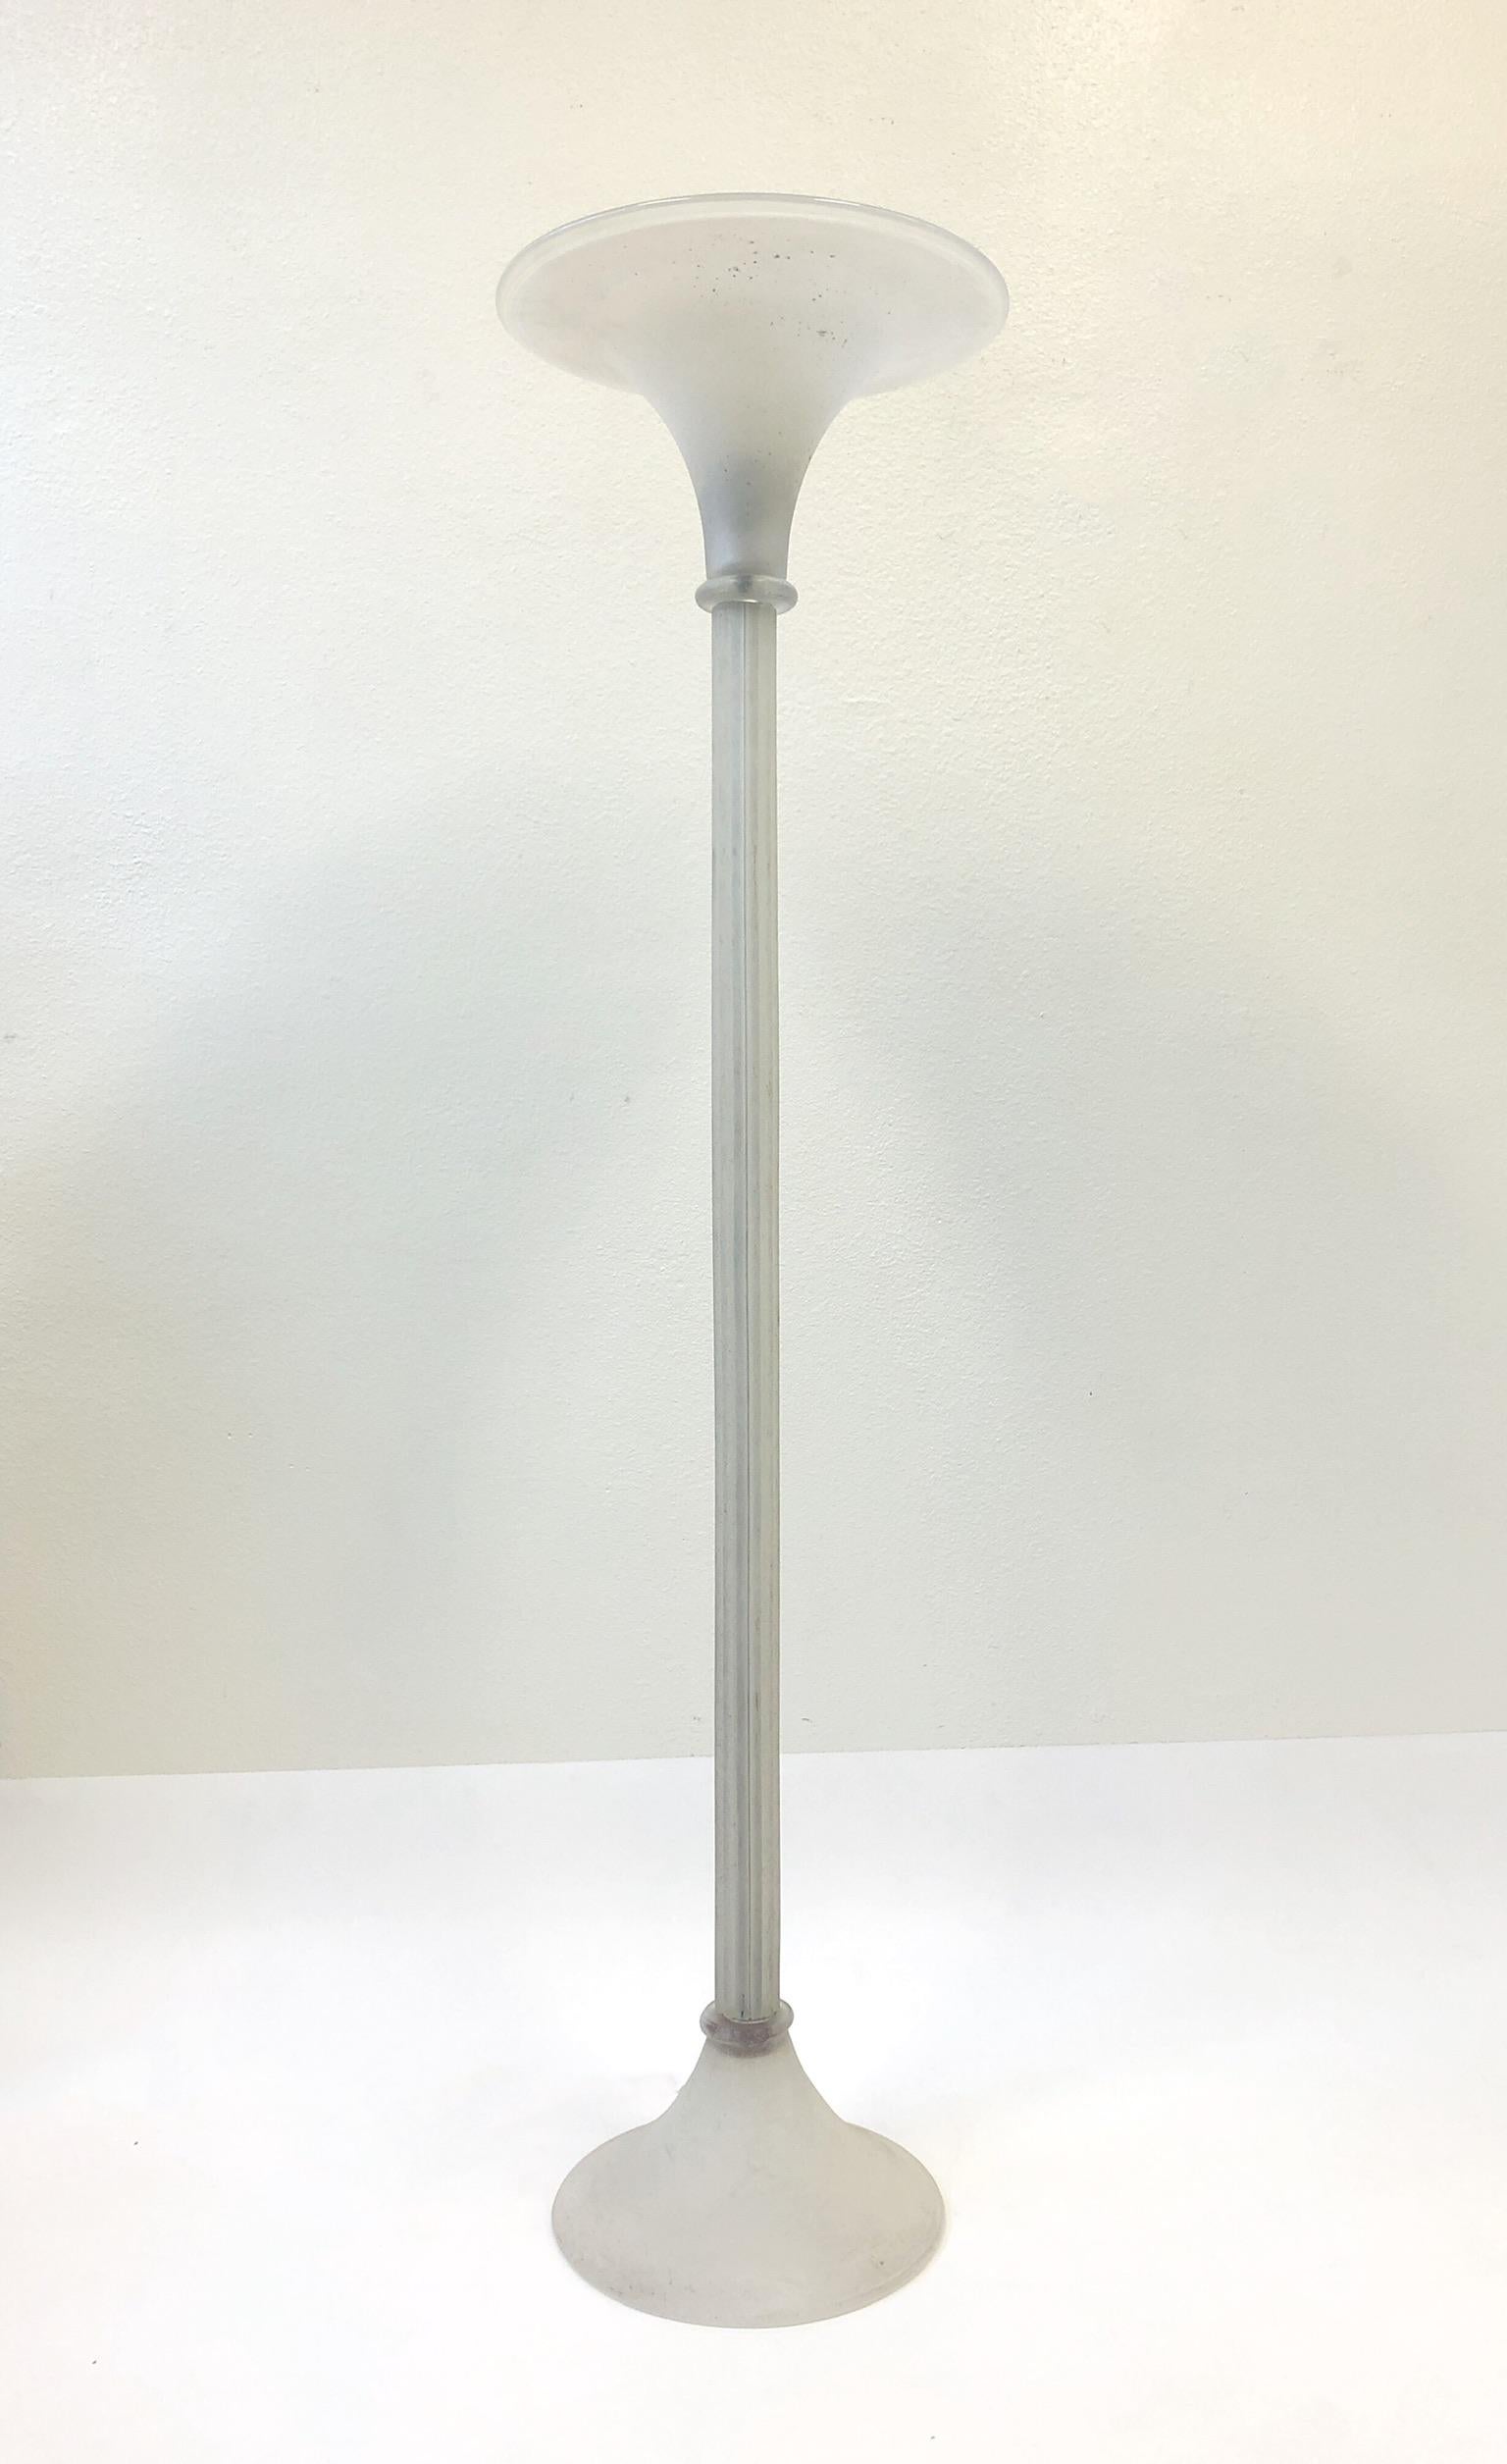 A glamorous Murano scavo glass torchère floor lamp designed by Karl Springer in the 1980s for Seguso Italy.
The lamp is signed by Karl Springer. The lamp takes a regular Edison lightbulb and it has a full range inline dimmer.
Dimensions: 67.5”